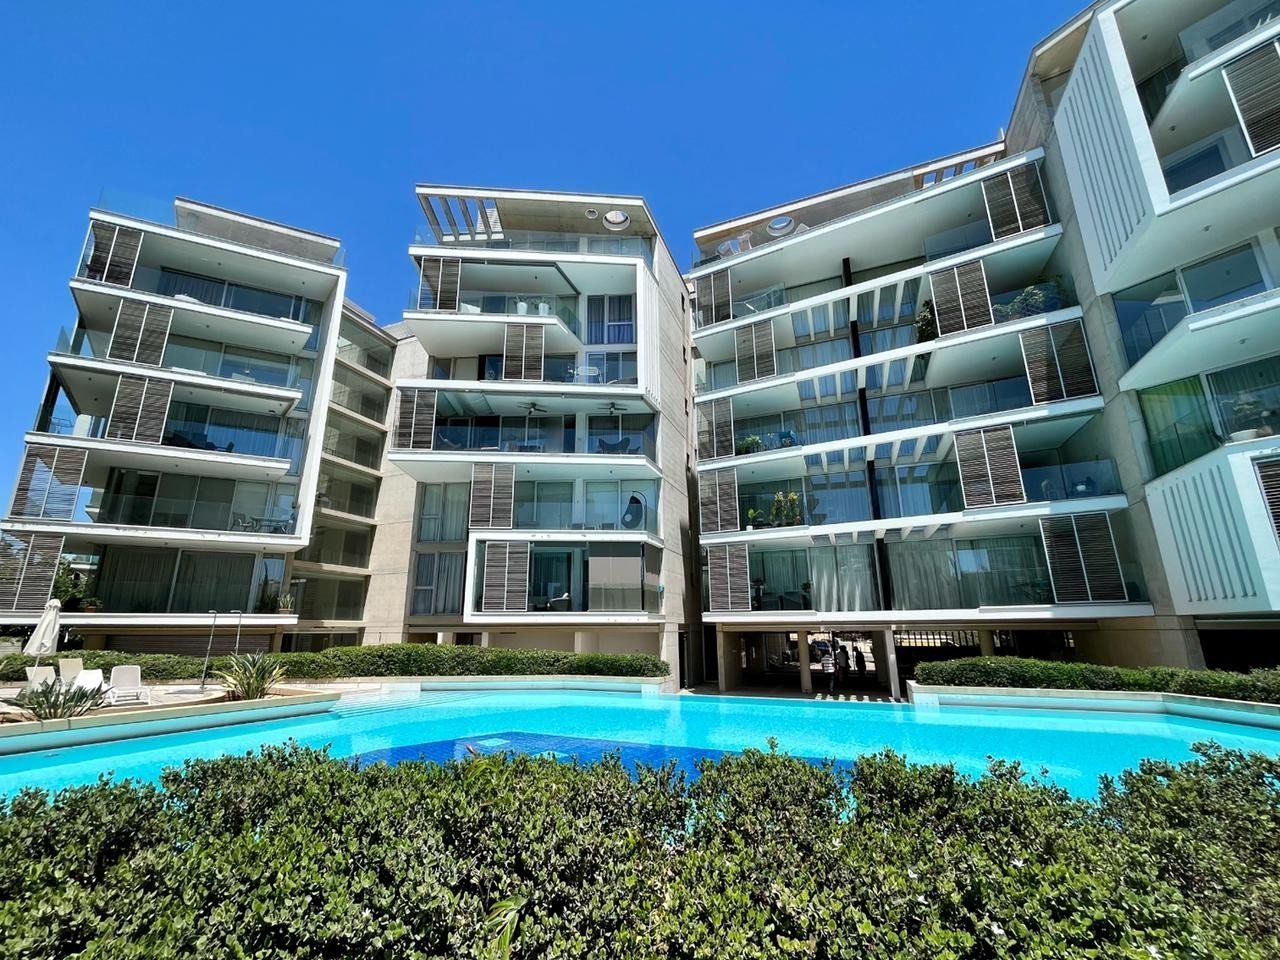 Property for Rent: Apartment (Flat) in Neapoli, Limassol for Rent | Key Realtor Cyprus